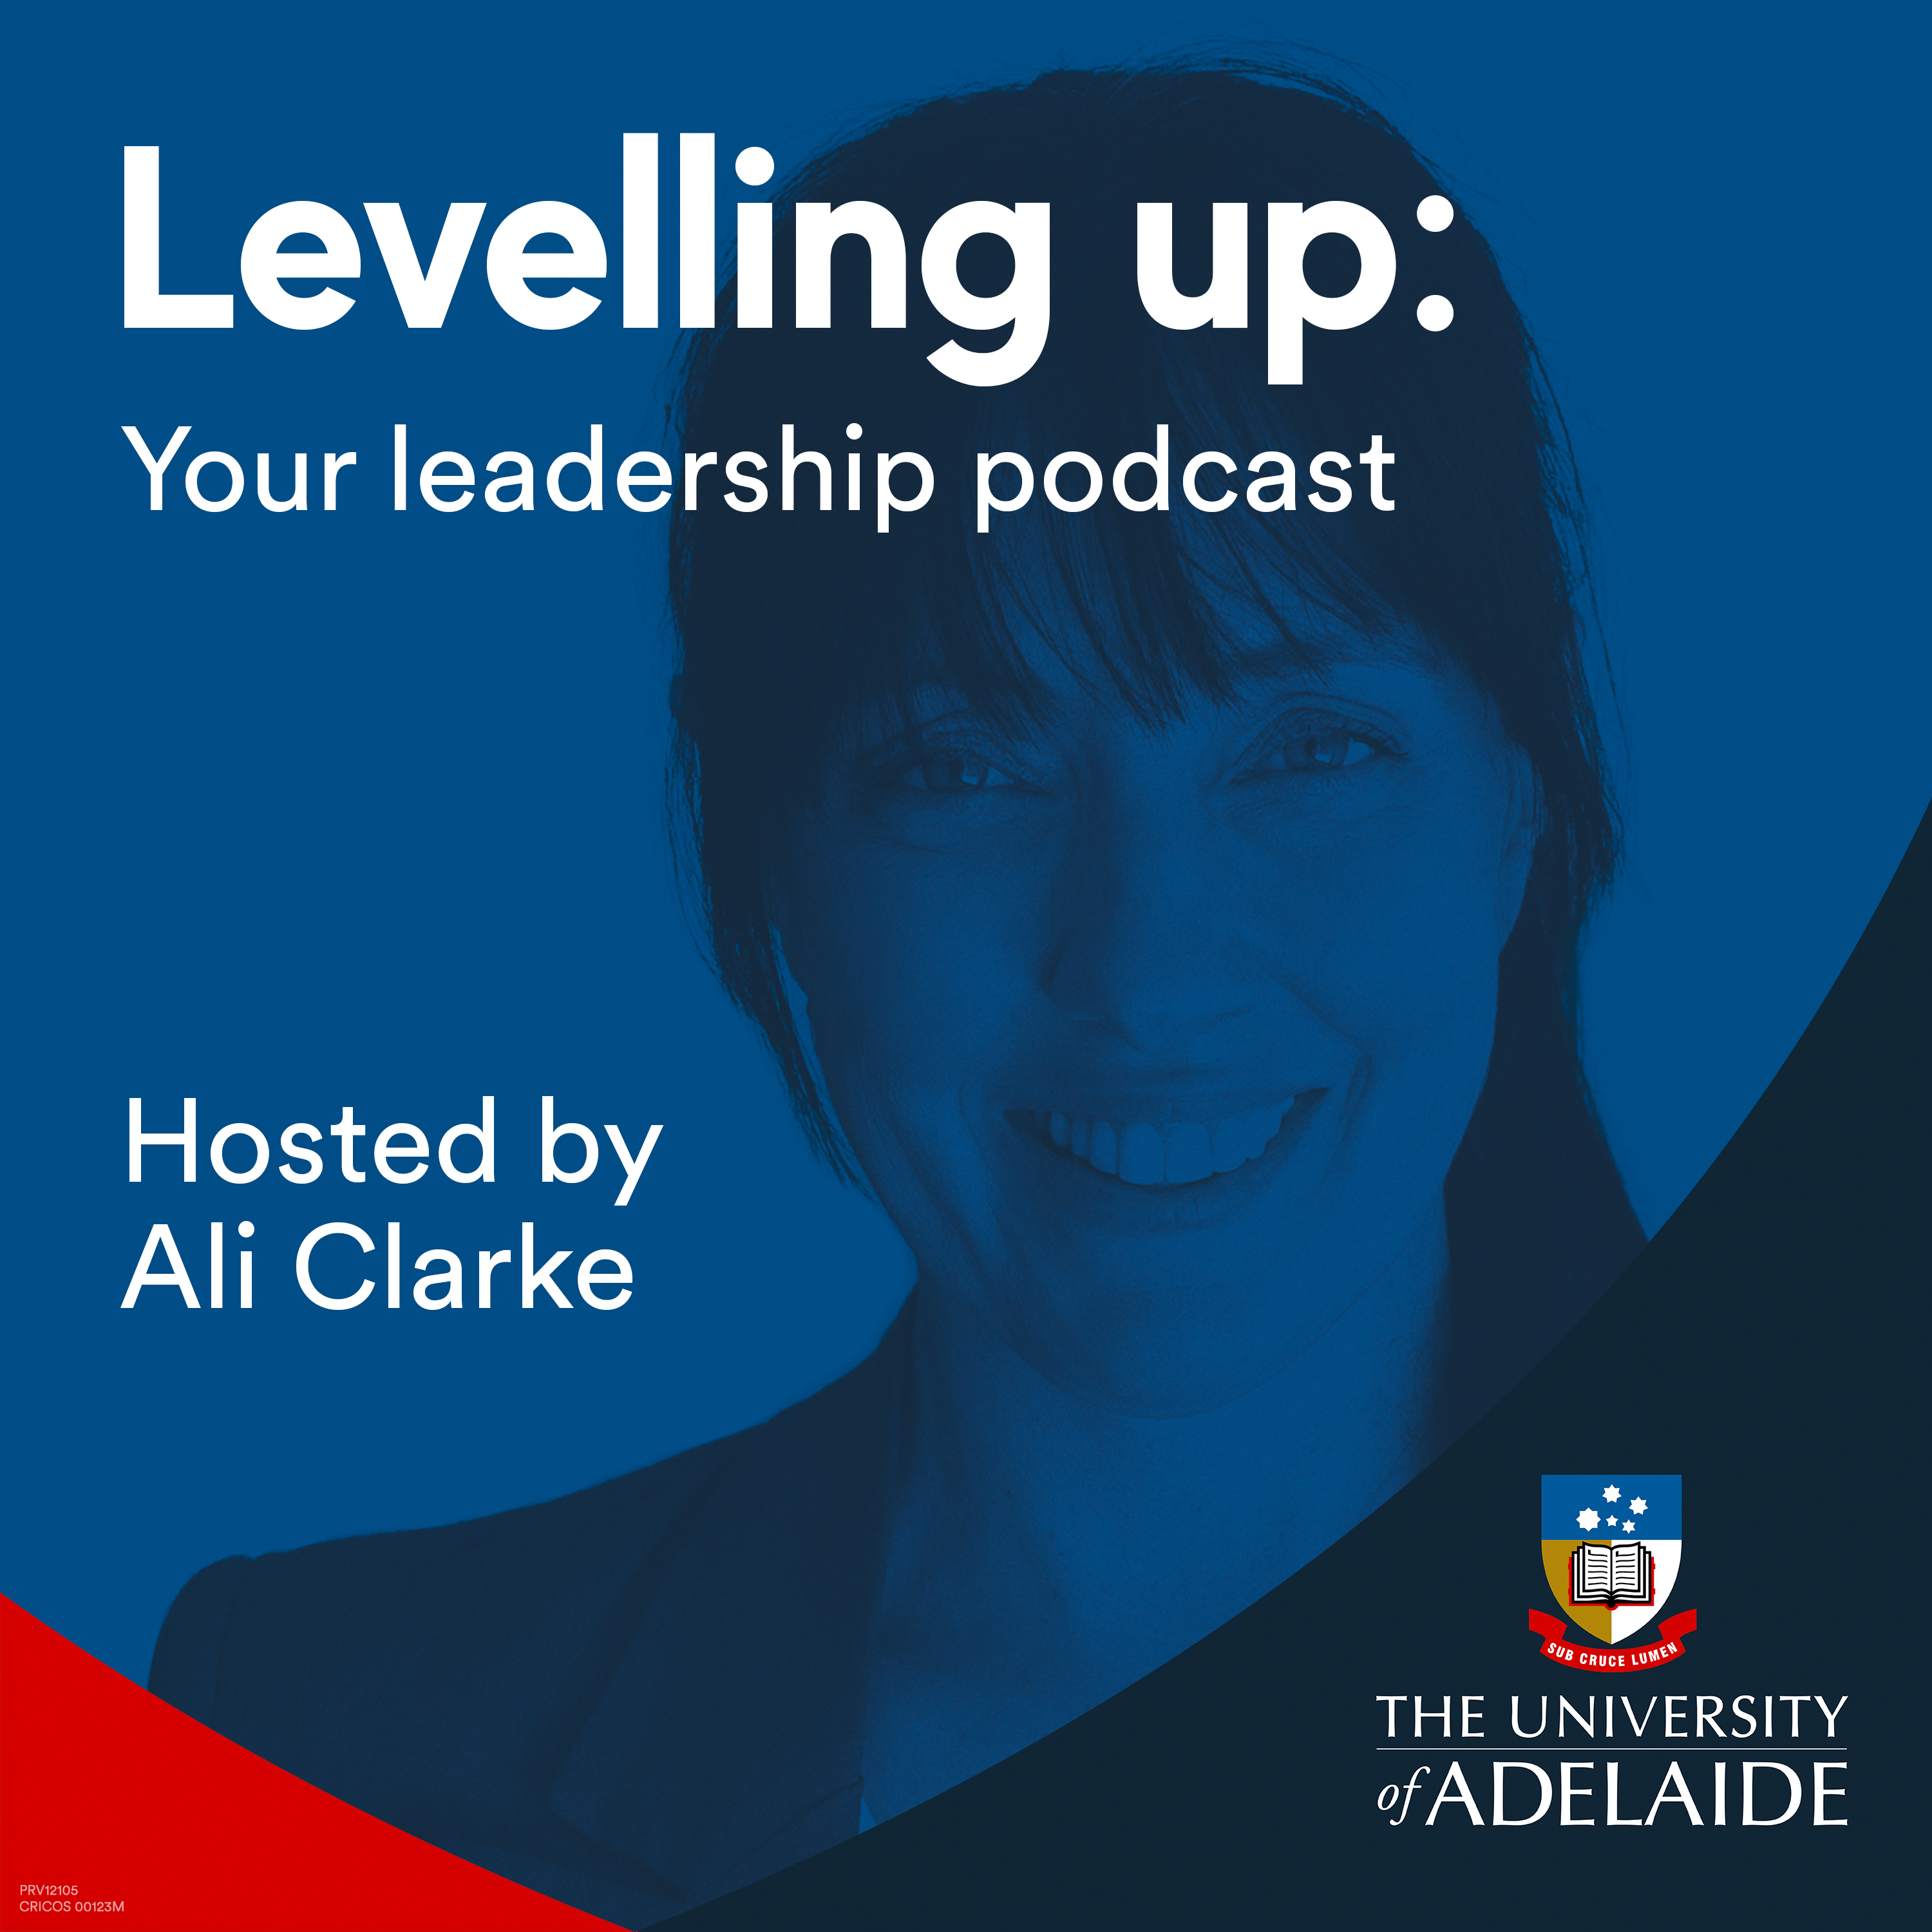 Levelling up: Your leadership podcast